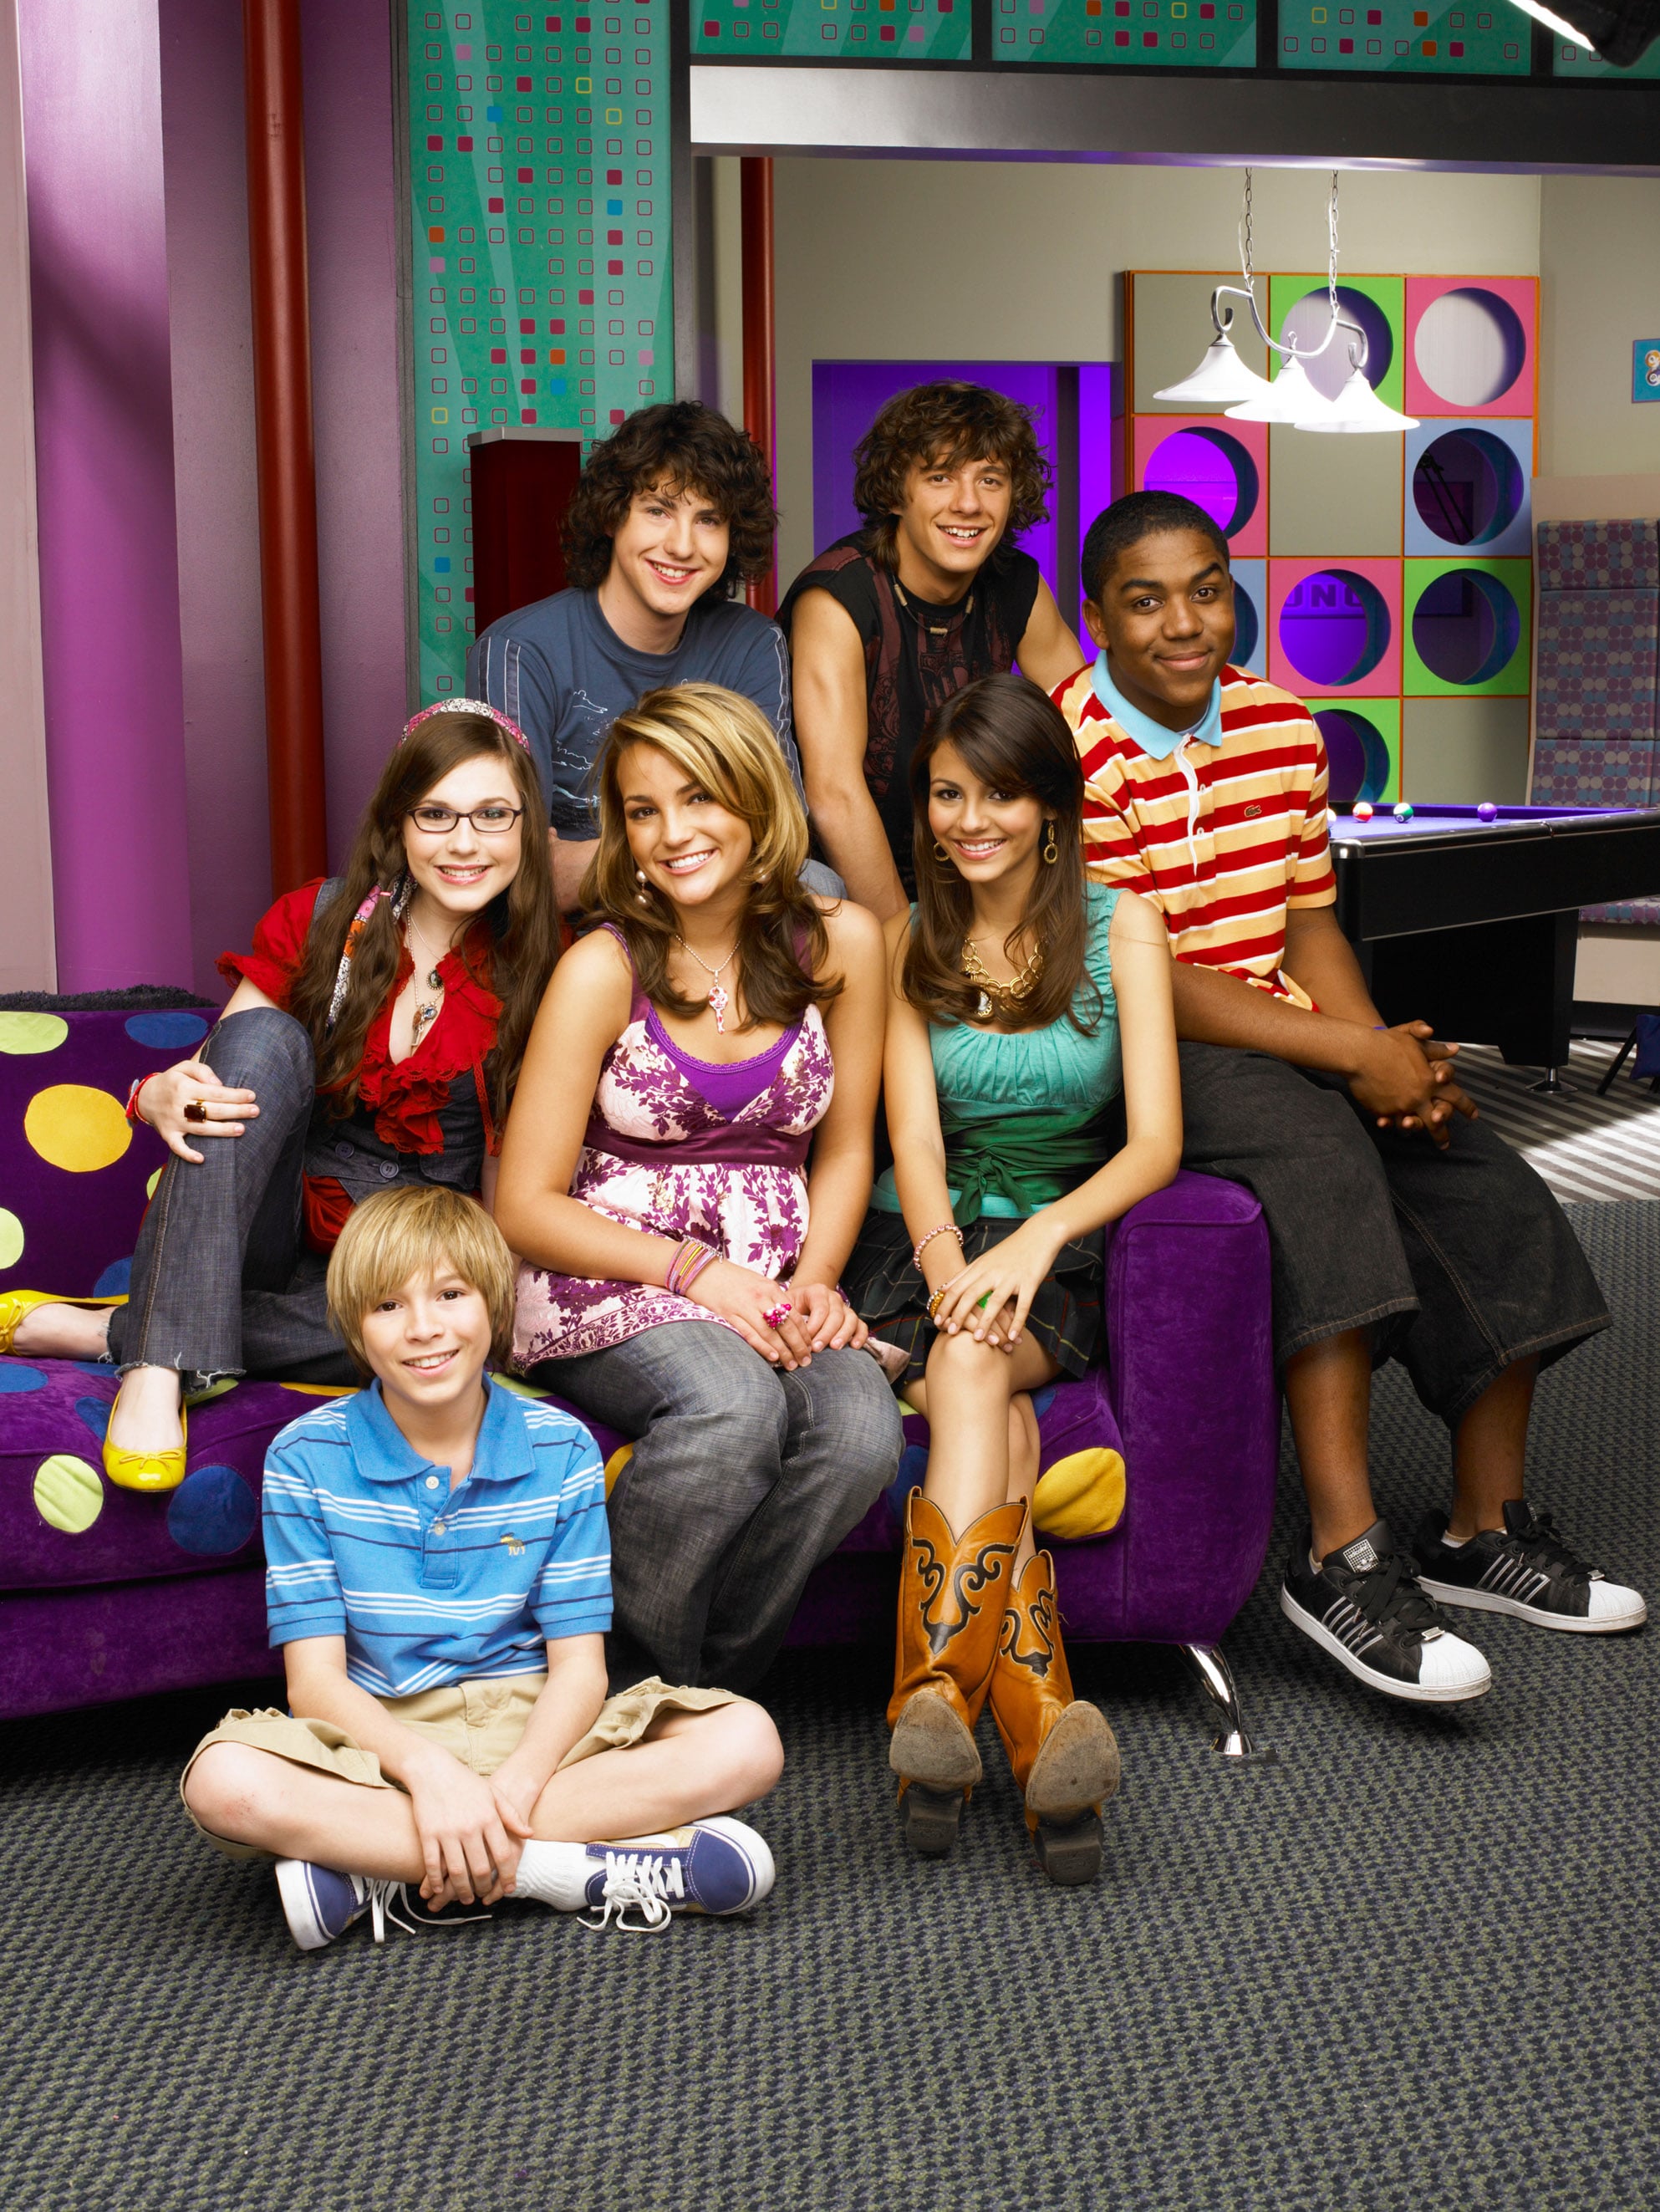 ZOEY 101, (top row, from left): Sean Flynn, Matthew Underwood, Christopher Massey, (middle): Erin Sanders, Jamie Lynn Spears, Victoria Justice, (bottom): Paul Butcher, 2005-08.  Nickelodeon / Courtesy: Everett Collection